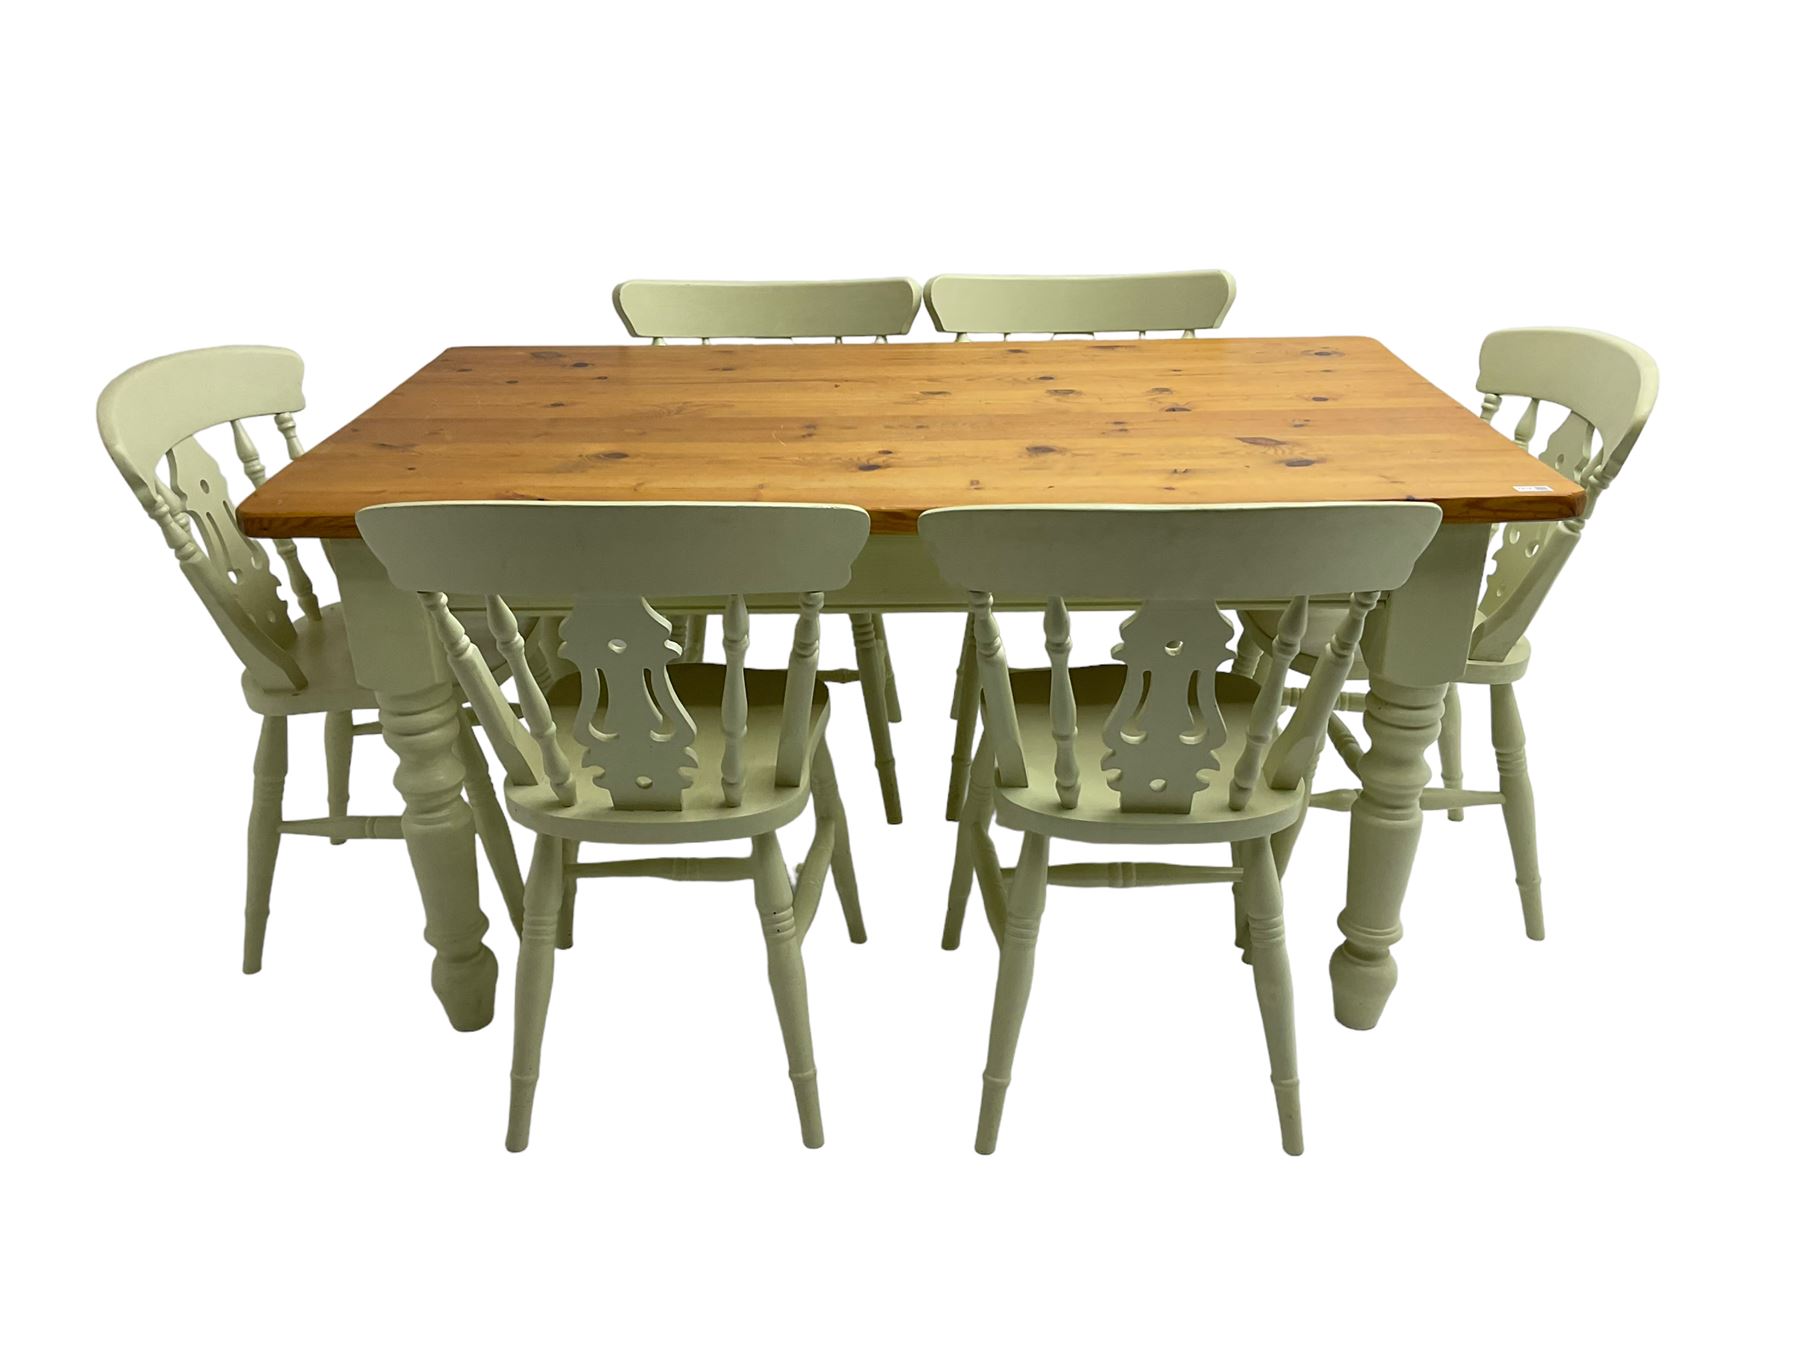 Traditional farmhouse pine dining table - Image 2 of 9